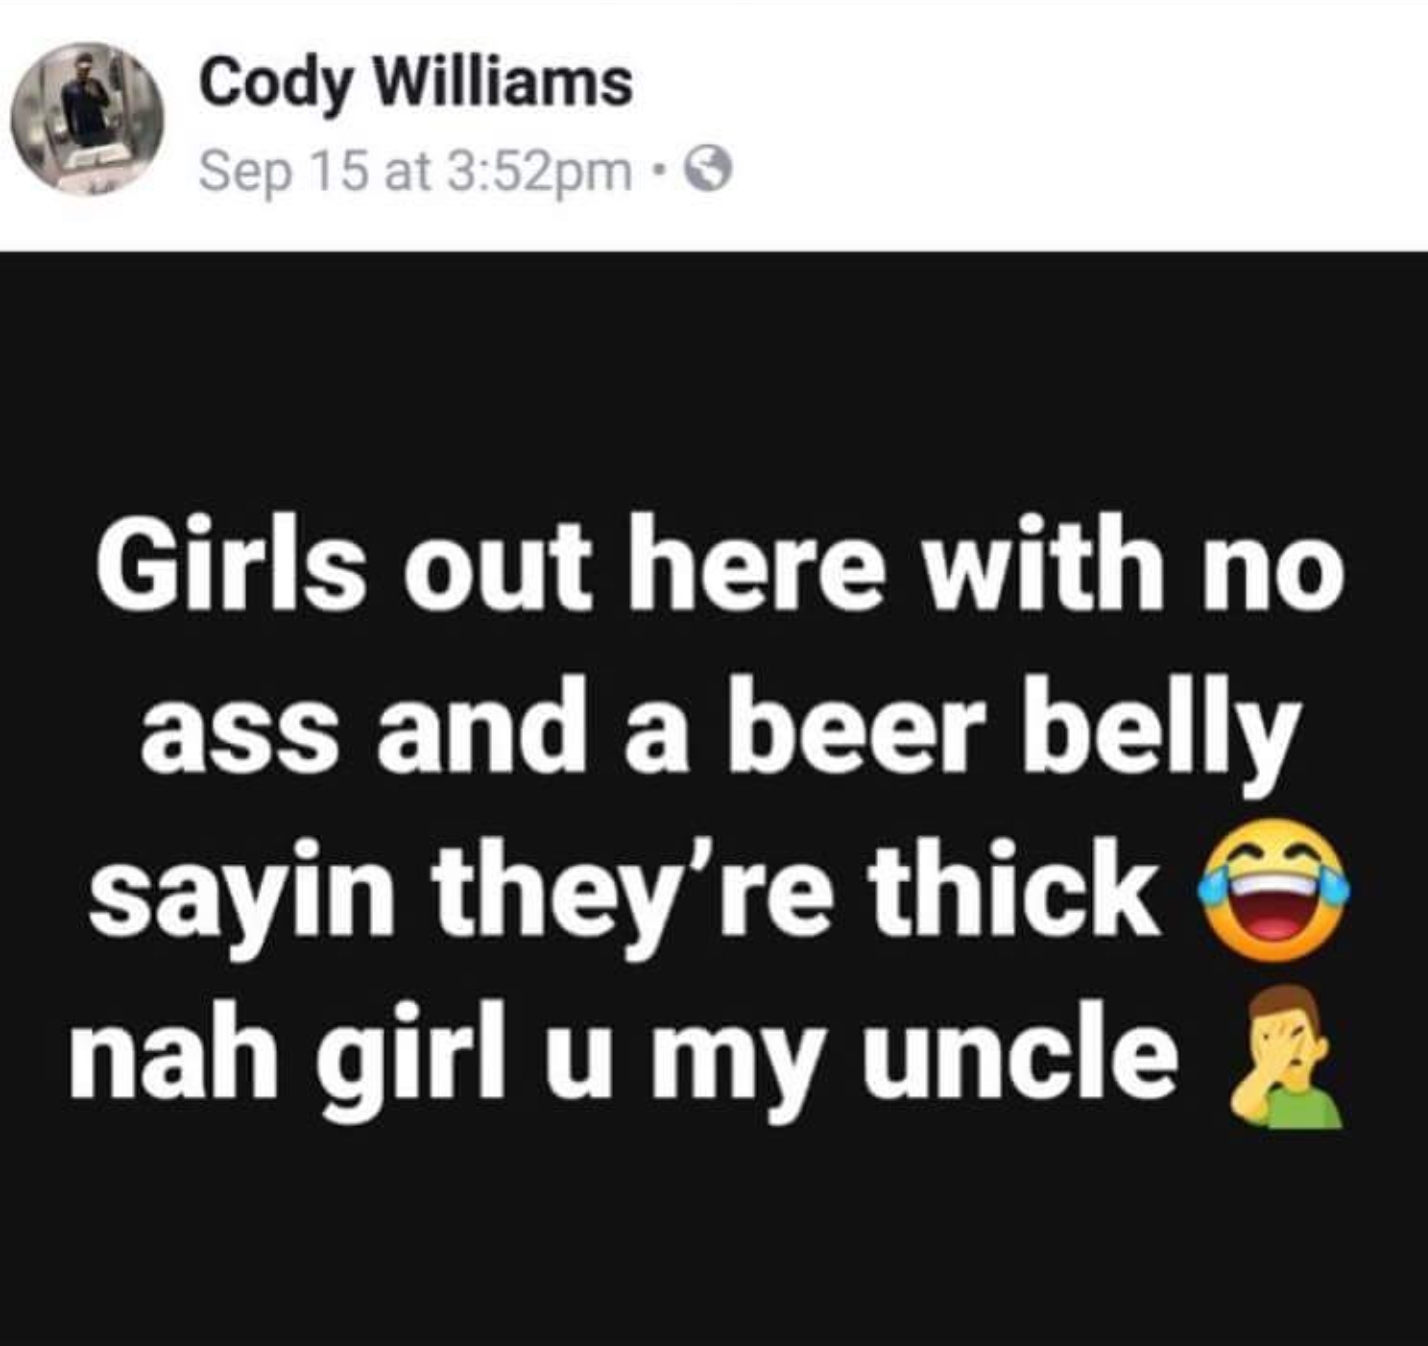 Every Family Has That Weird Uncle That Says Weird Shit Like This At Thanksgiving Dinner Deathroue I M So Hungry Icould Eat A Grown Man S Ass Right Now Damn Unc Can T Take You